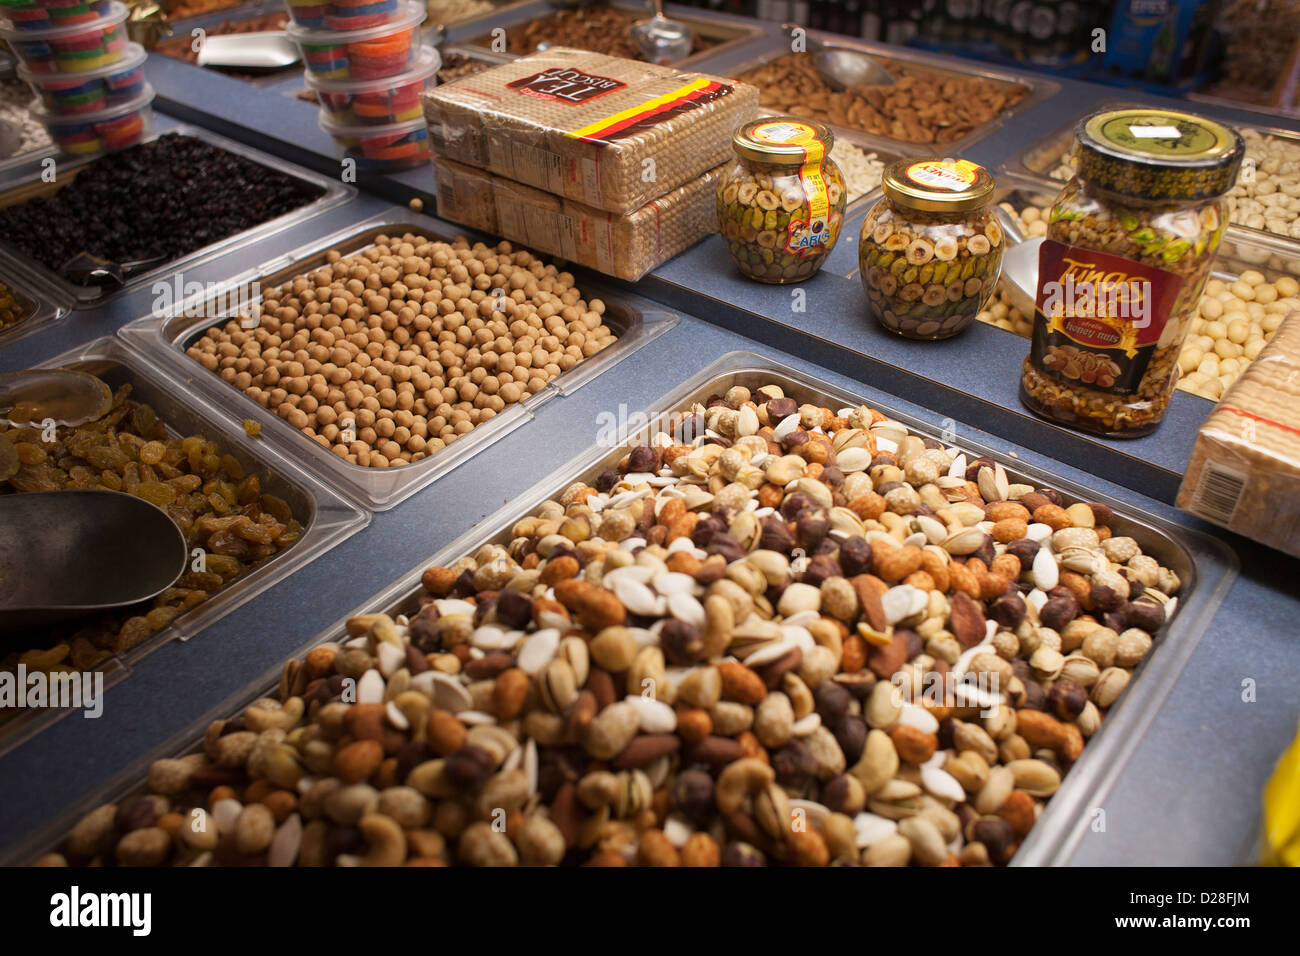 A Middle Eastern deli in Watertown, Massachusetts has a wide variety of nuts and beans Stock Photo